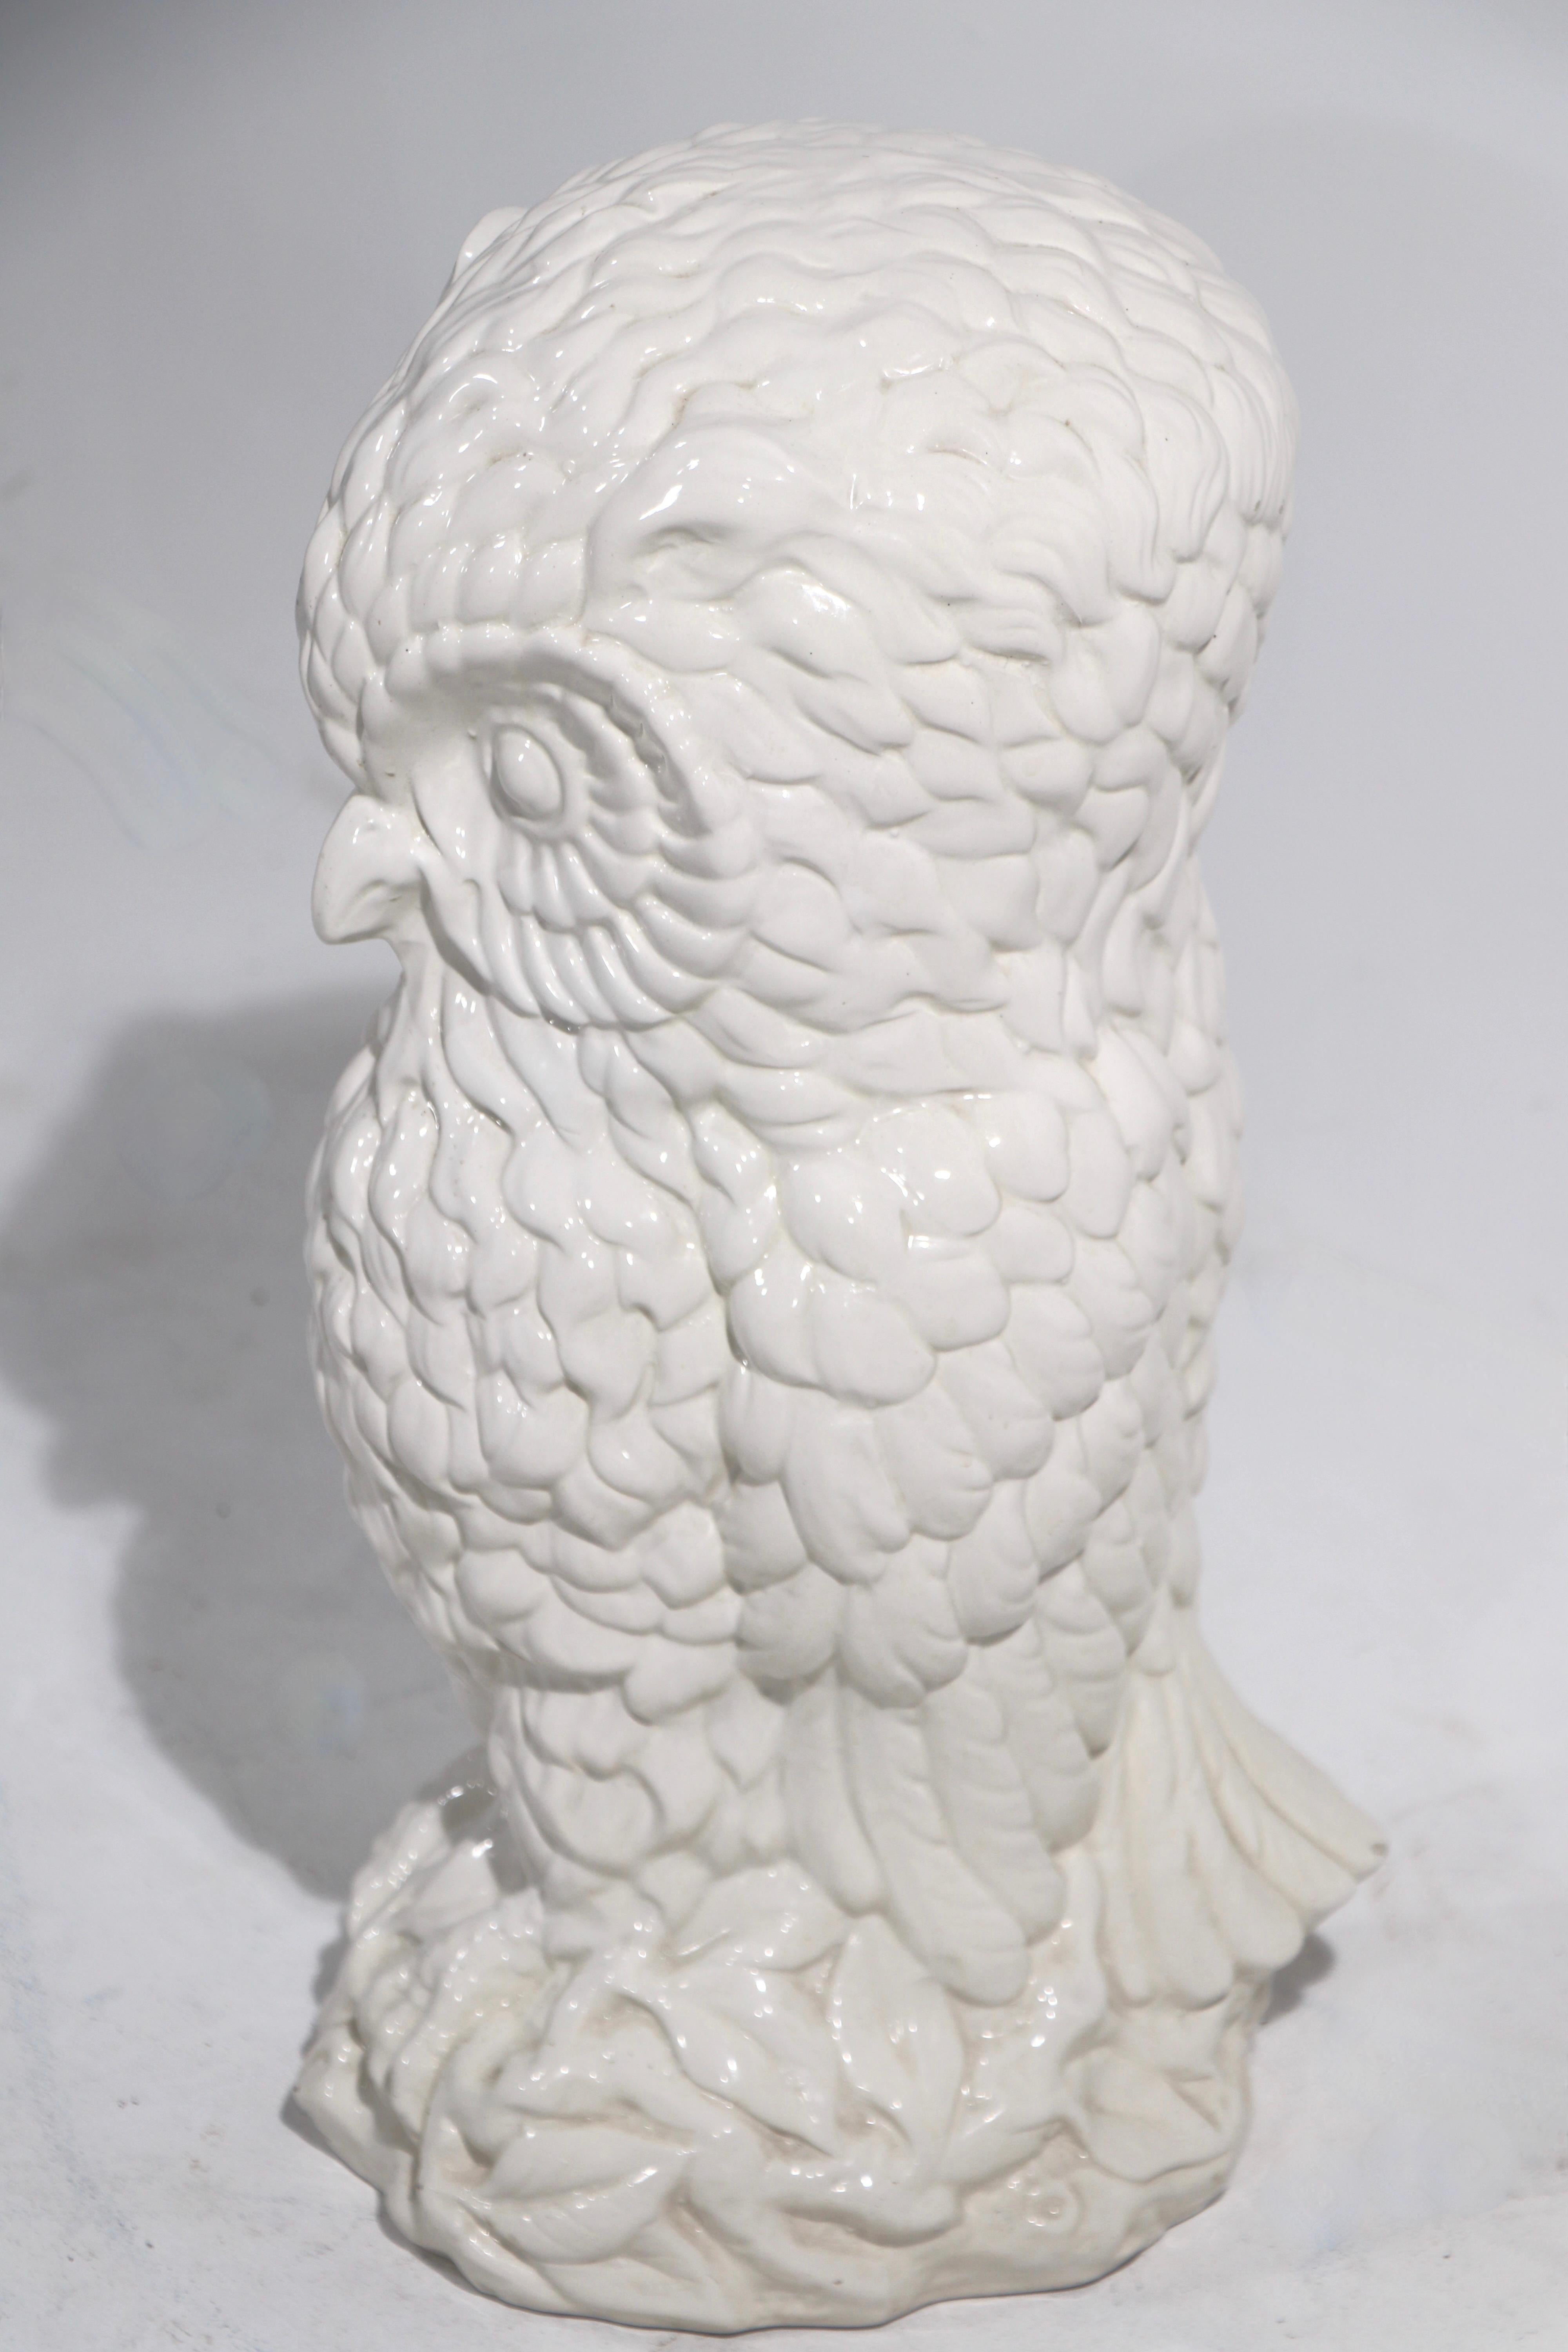 Attractive white on white ceramic owl, marked Made in Italy A 66. This example is in very good original condition showing only light signs of age, normal and consistent with age.